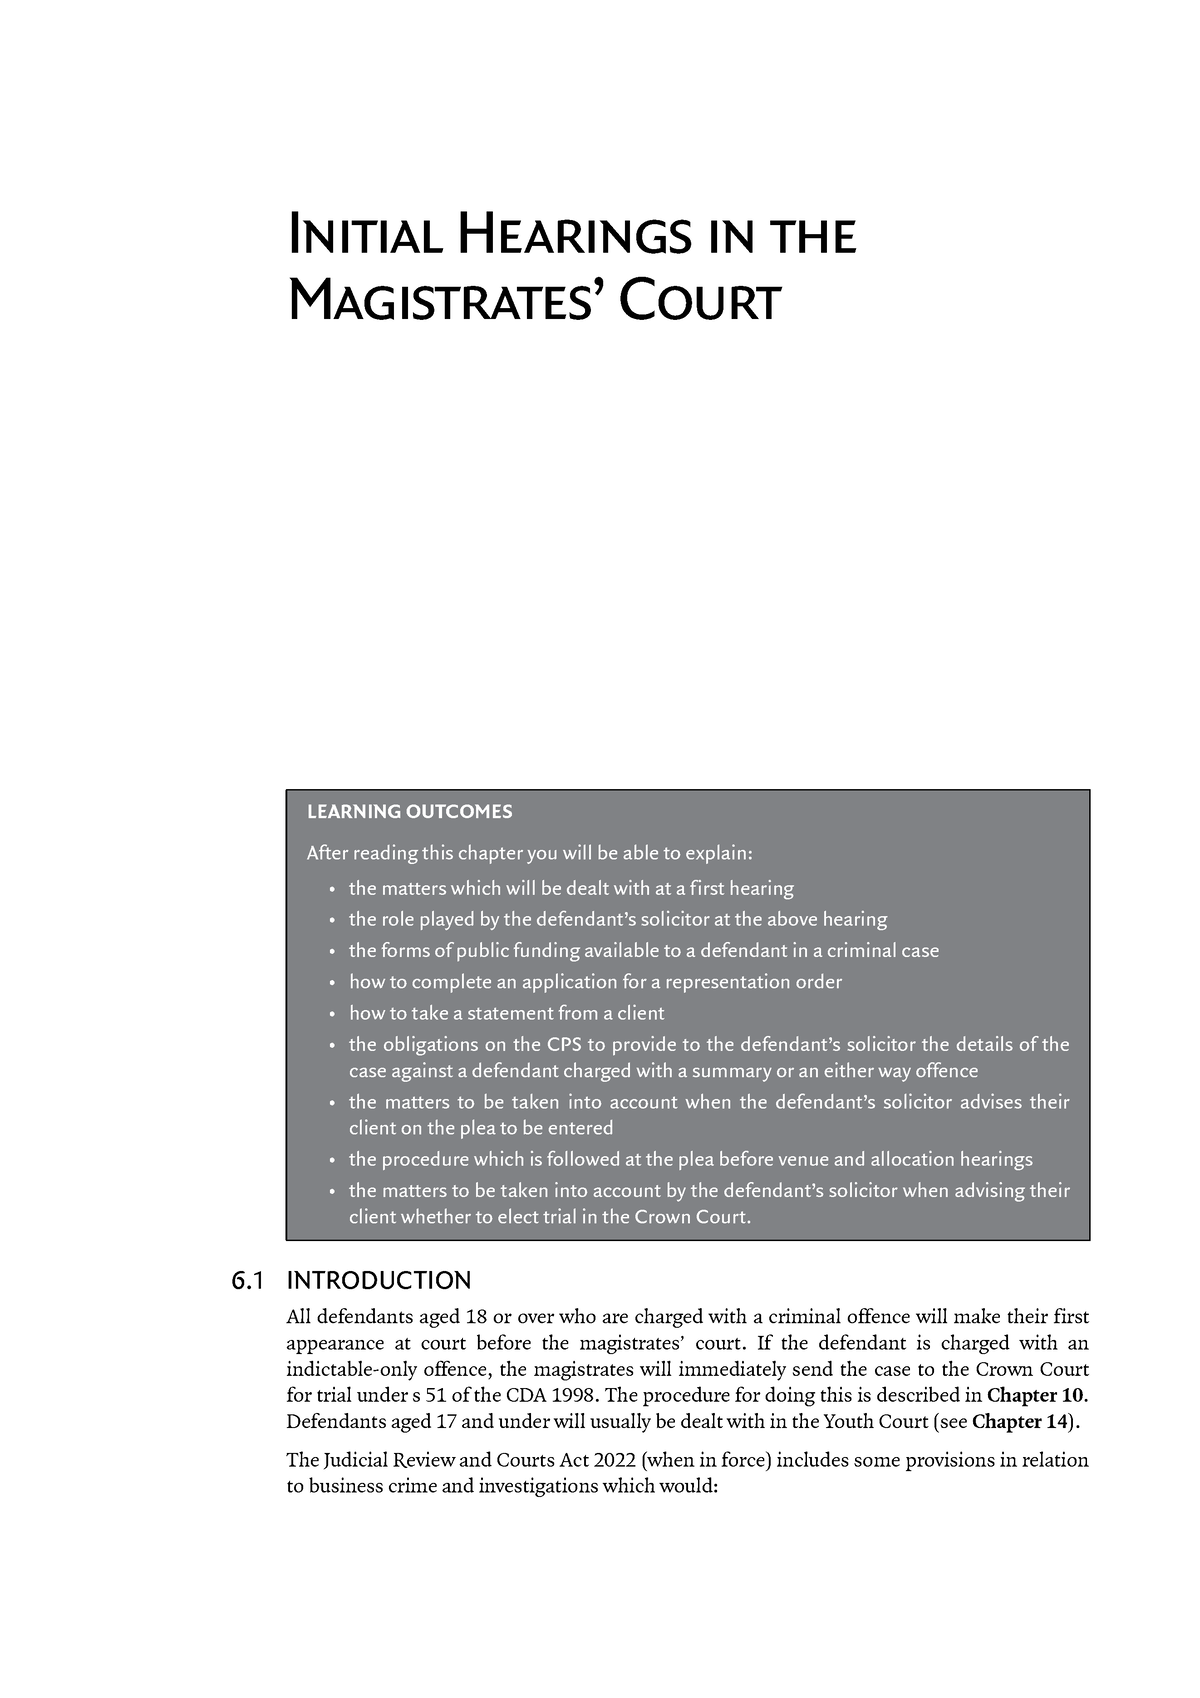 Hearings at the Magistrates Court Initial Hearings in the Magistrates